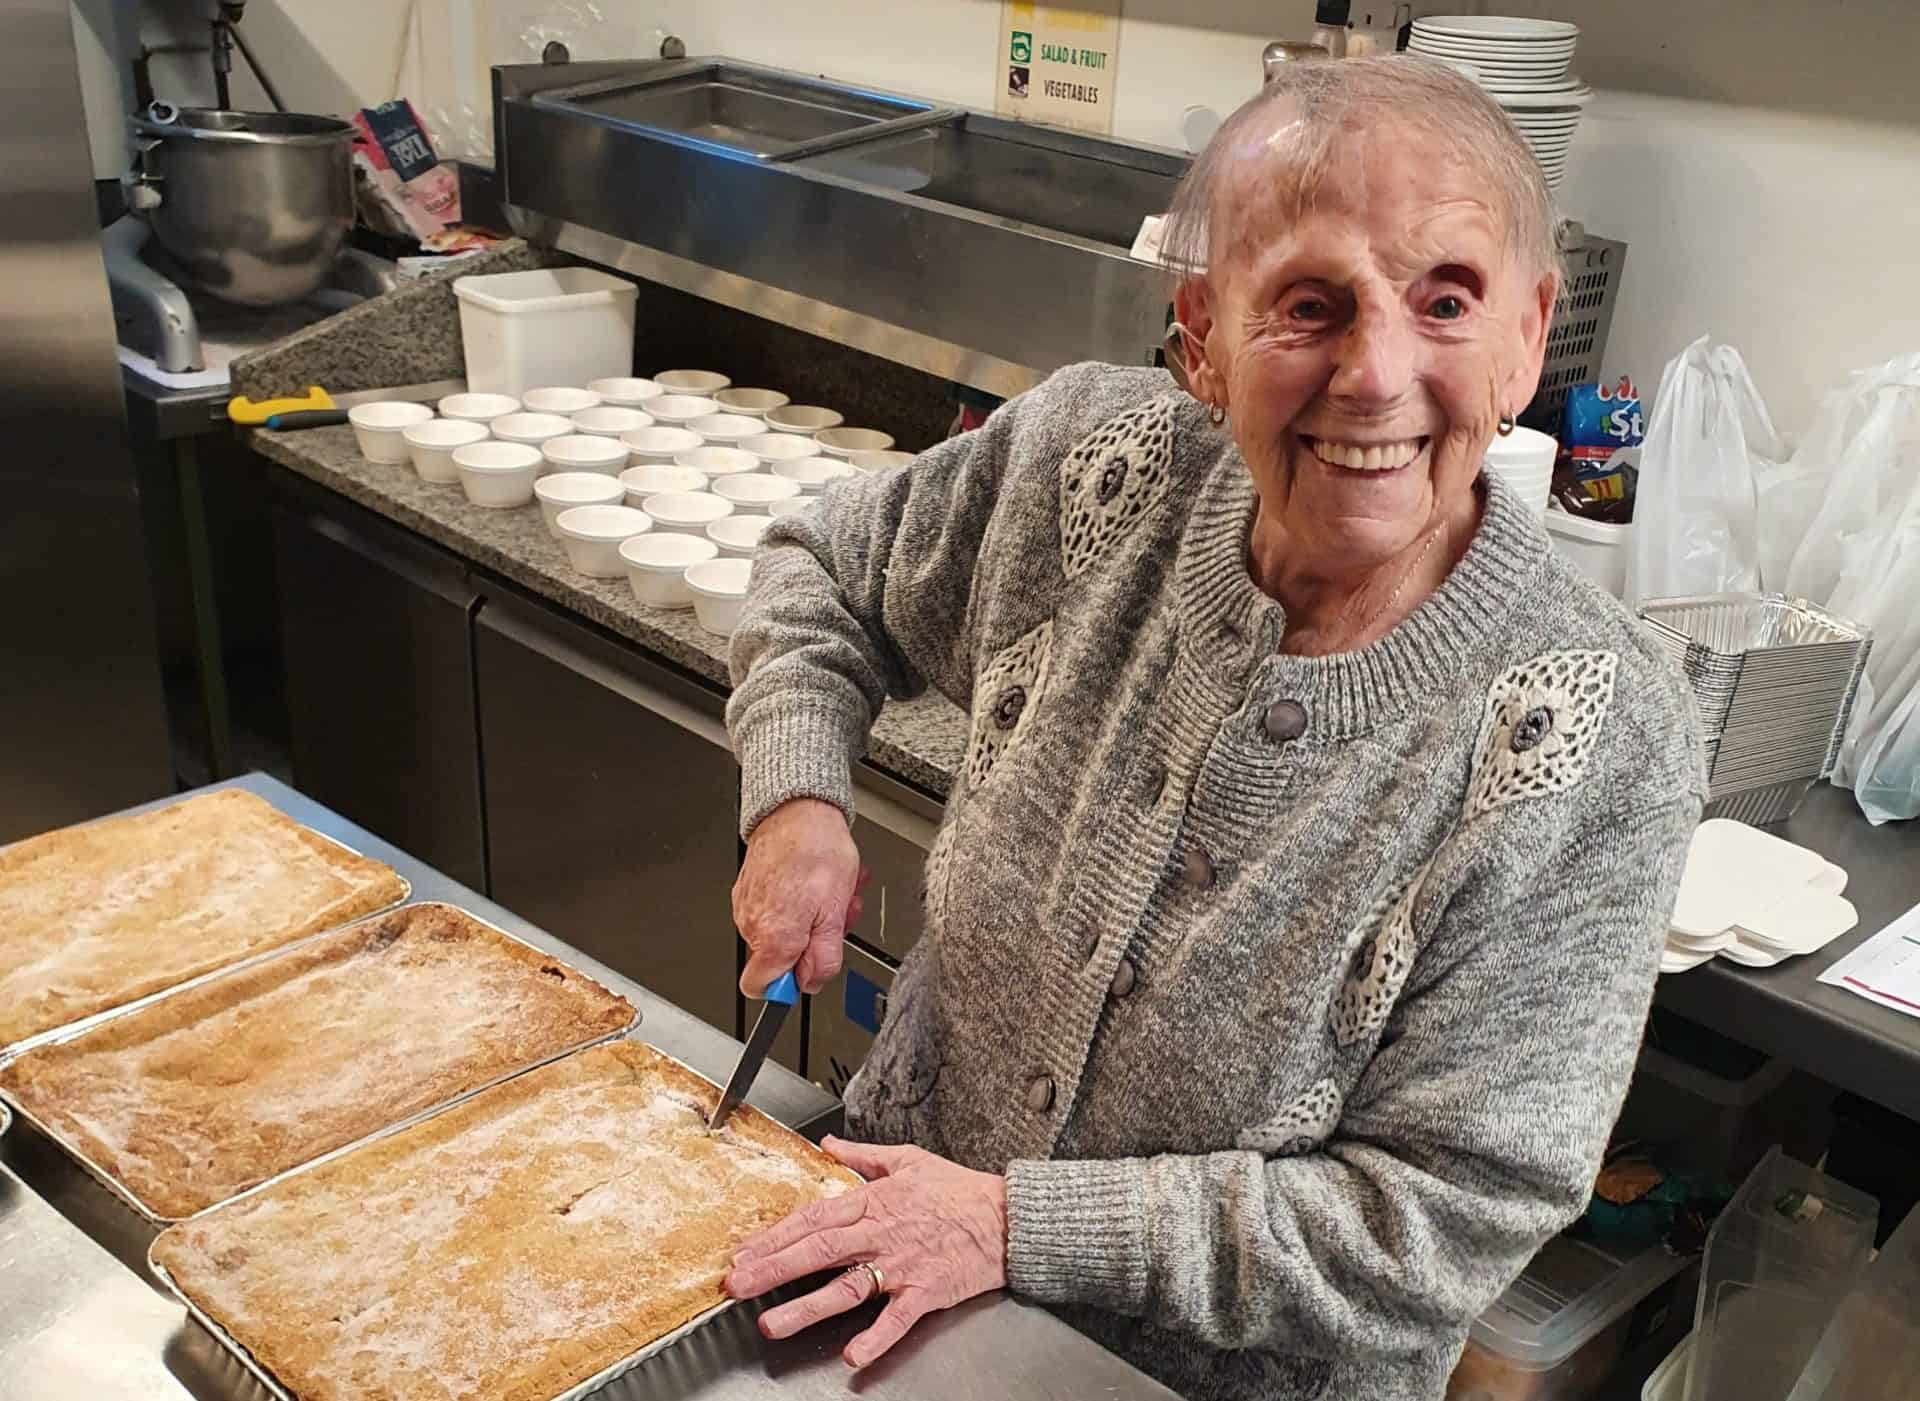 89-year-old rallies to Marcus Rashford’s calls and bakes pies to help feed hungry kids